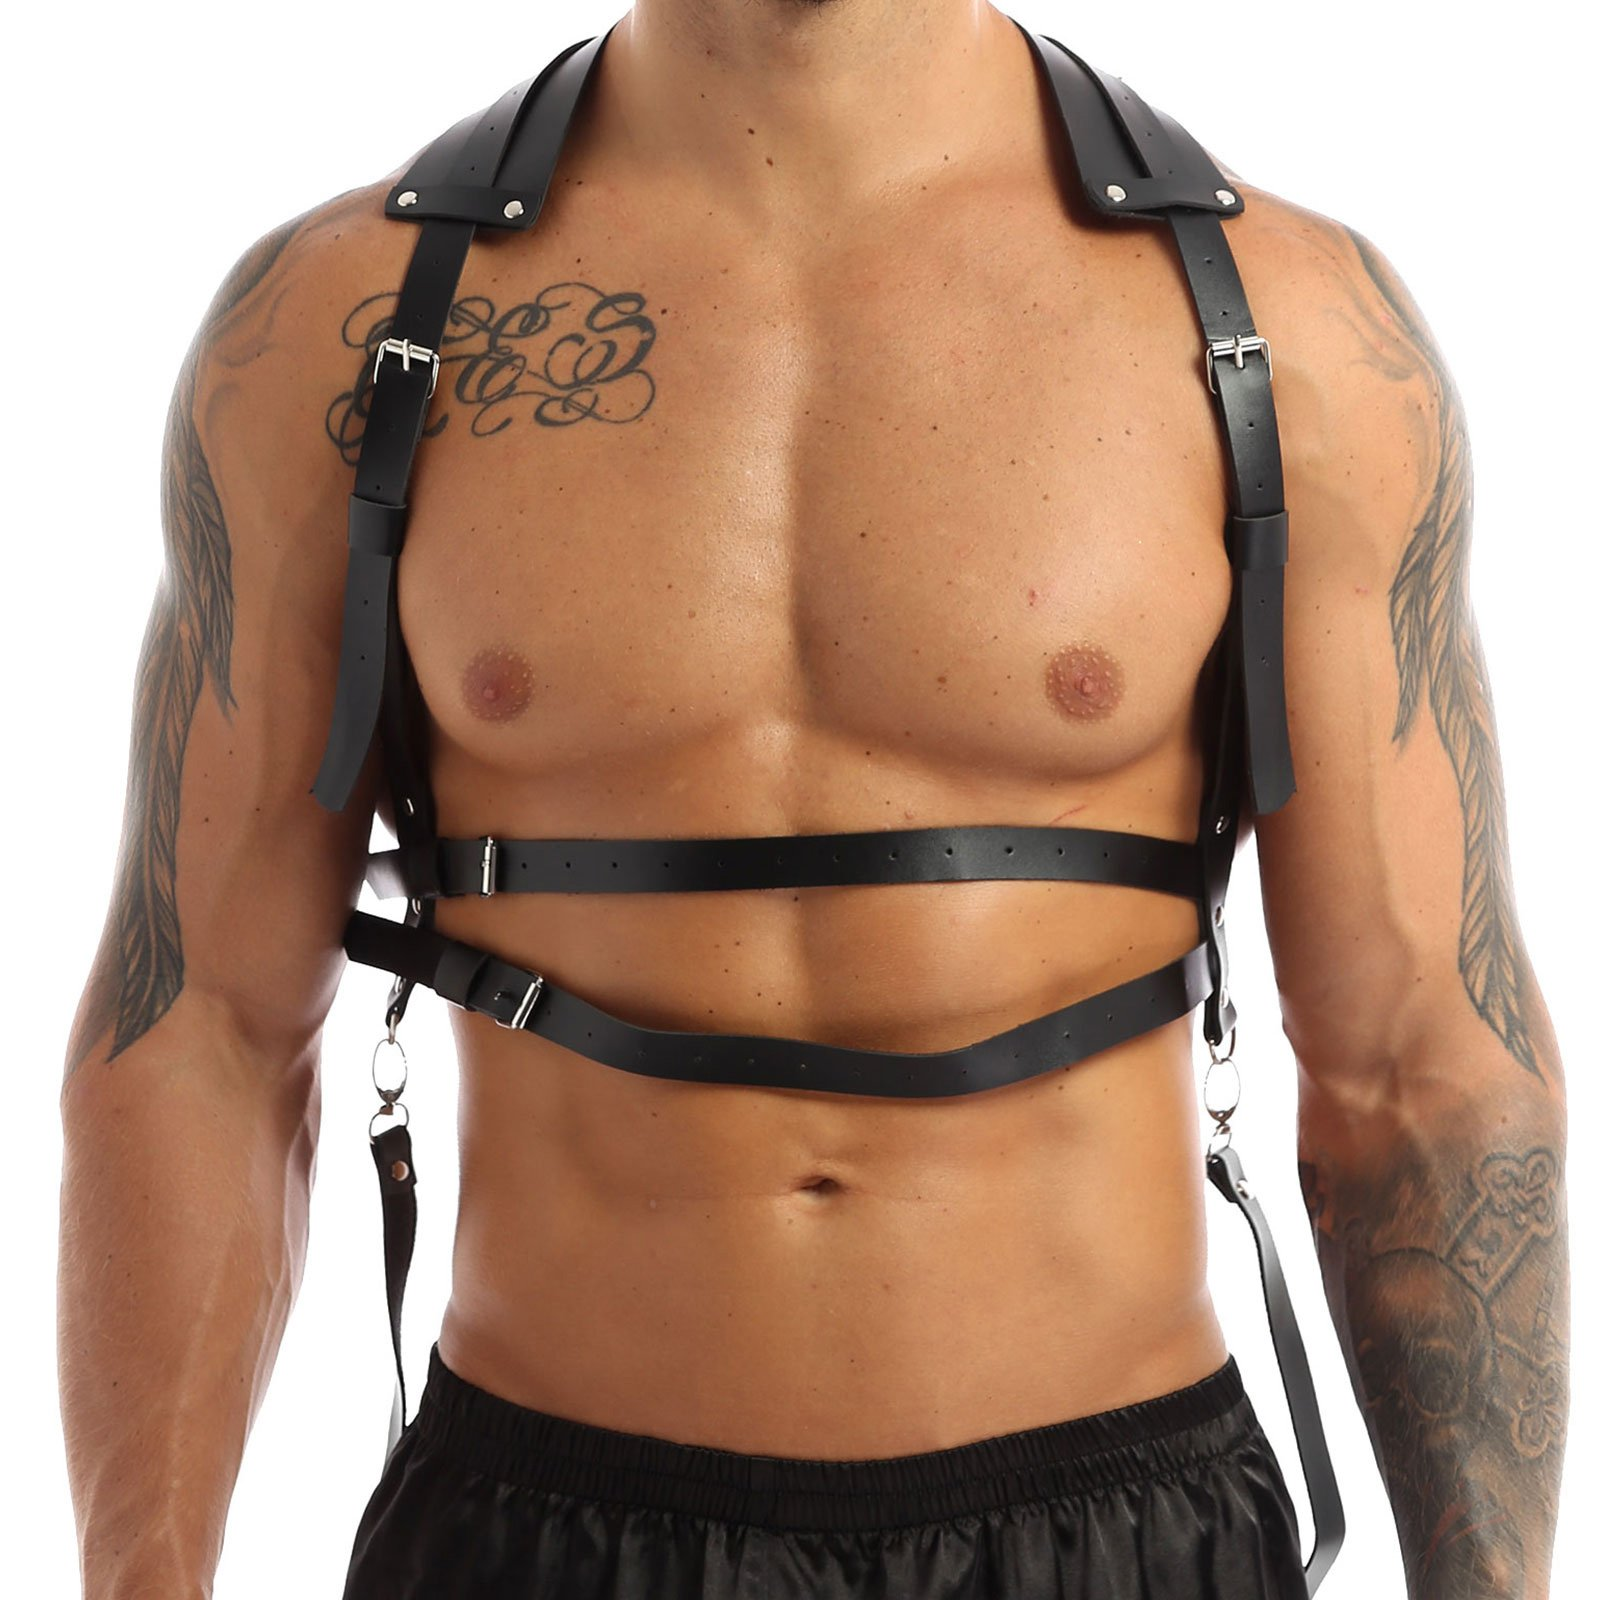 Faux Leather Body Chest Harness Costumes with O-rings Buttons / Bondage Accessory - EVE's SECRETS